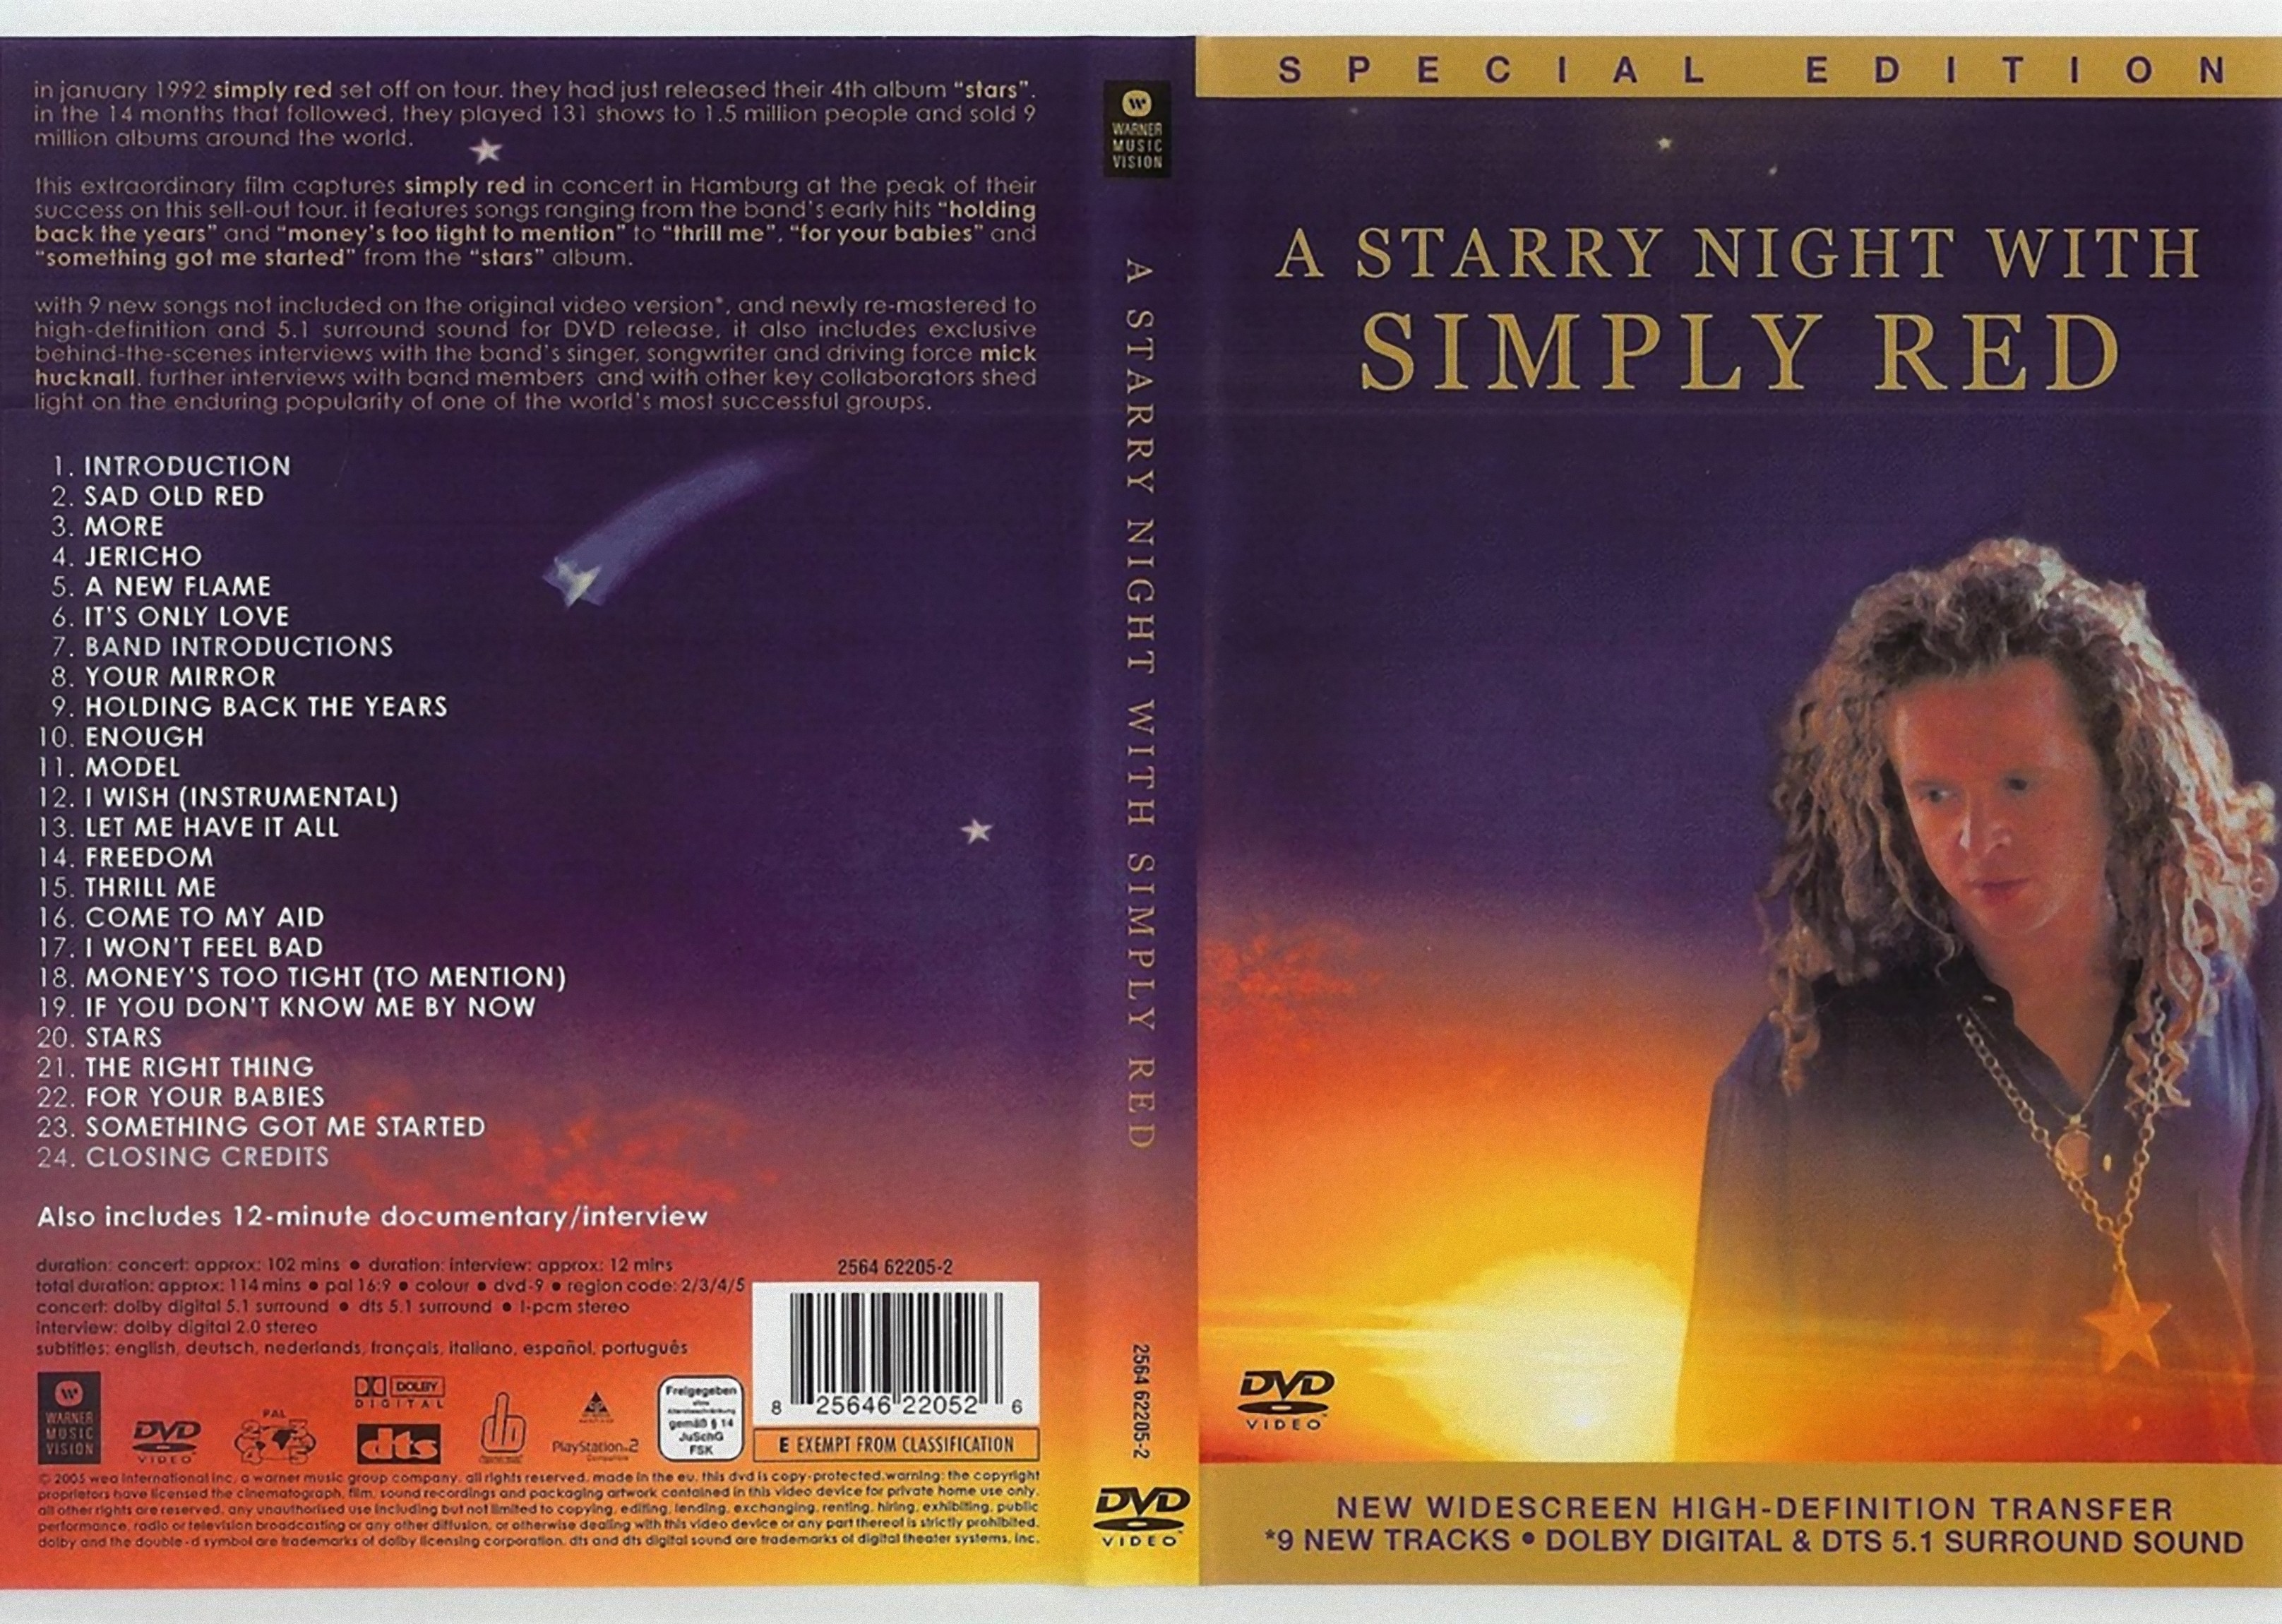 Jaquette DVD A Starry Night with Simply Red